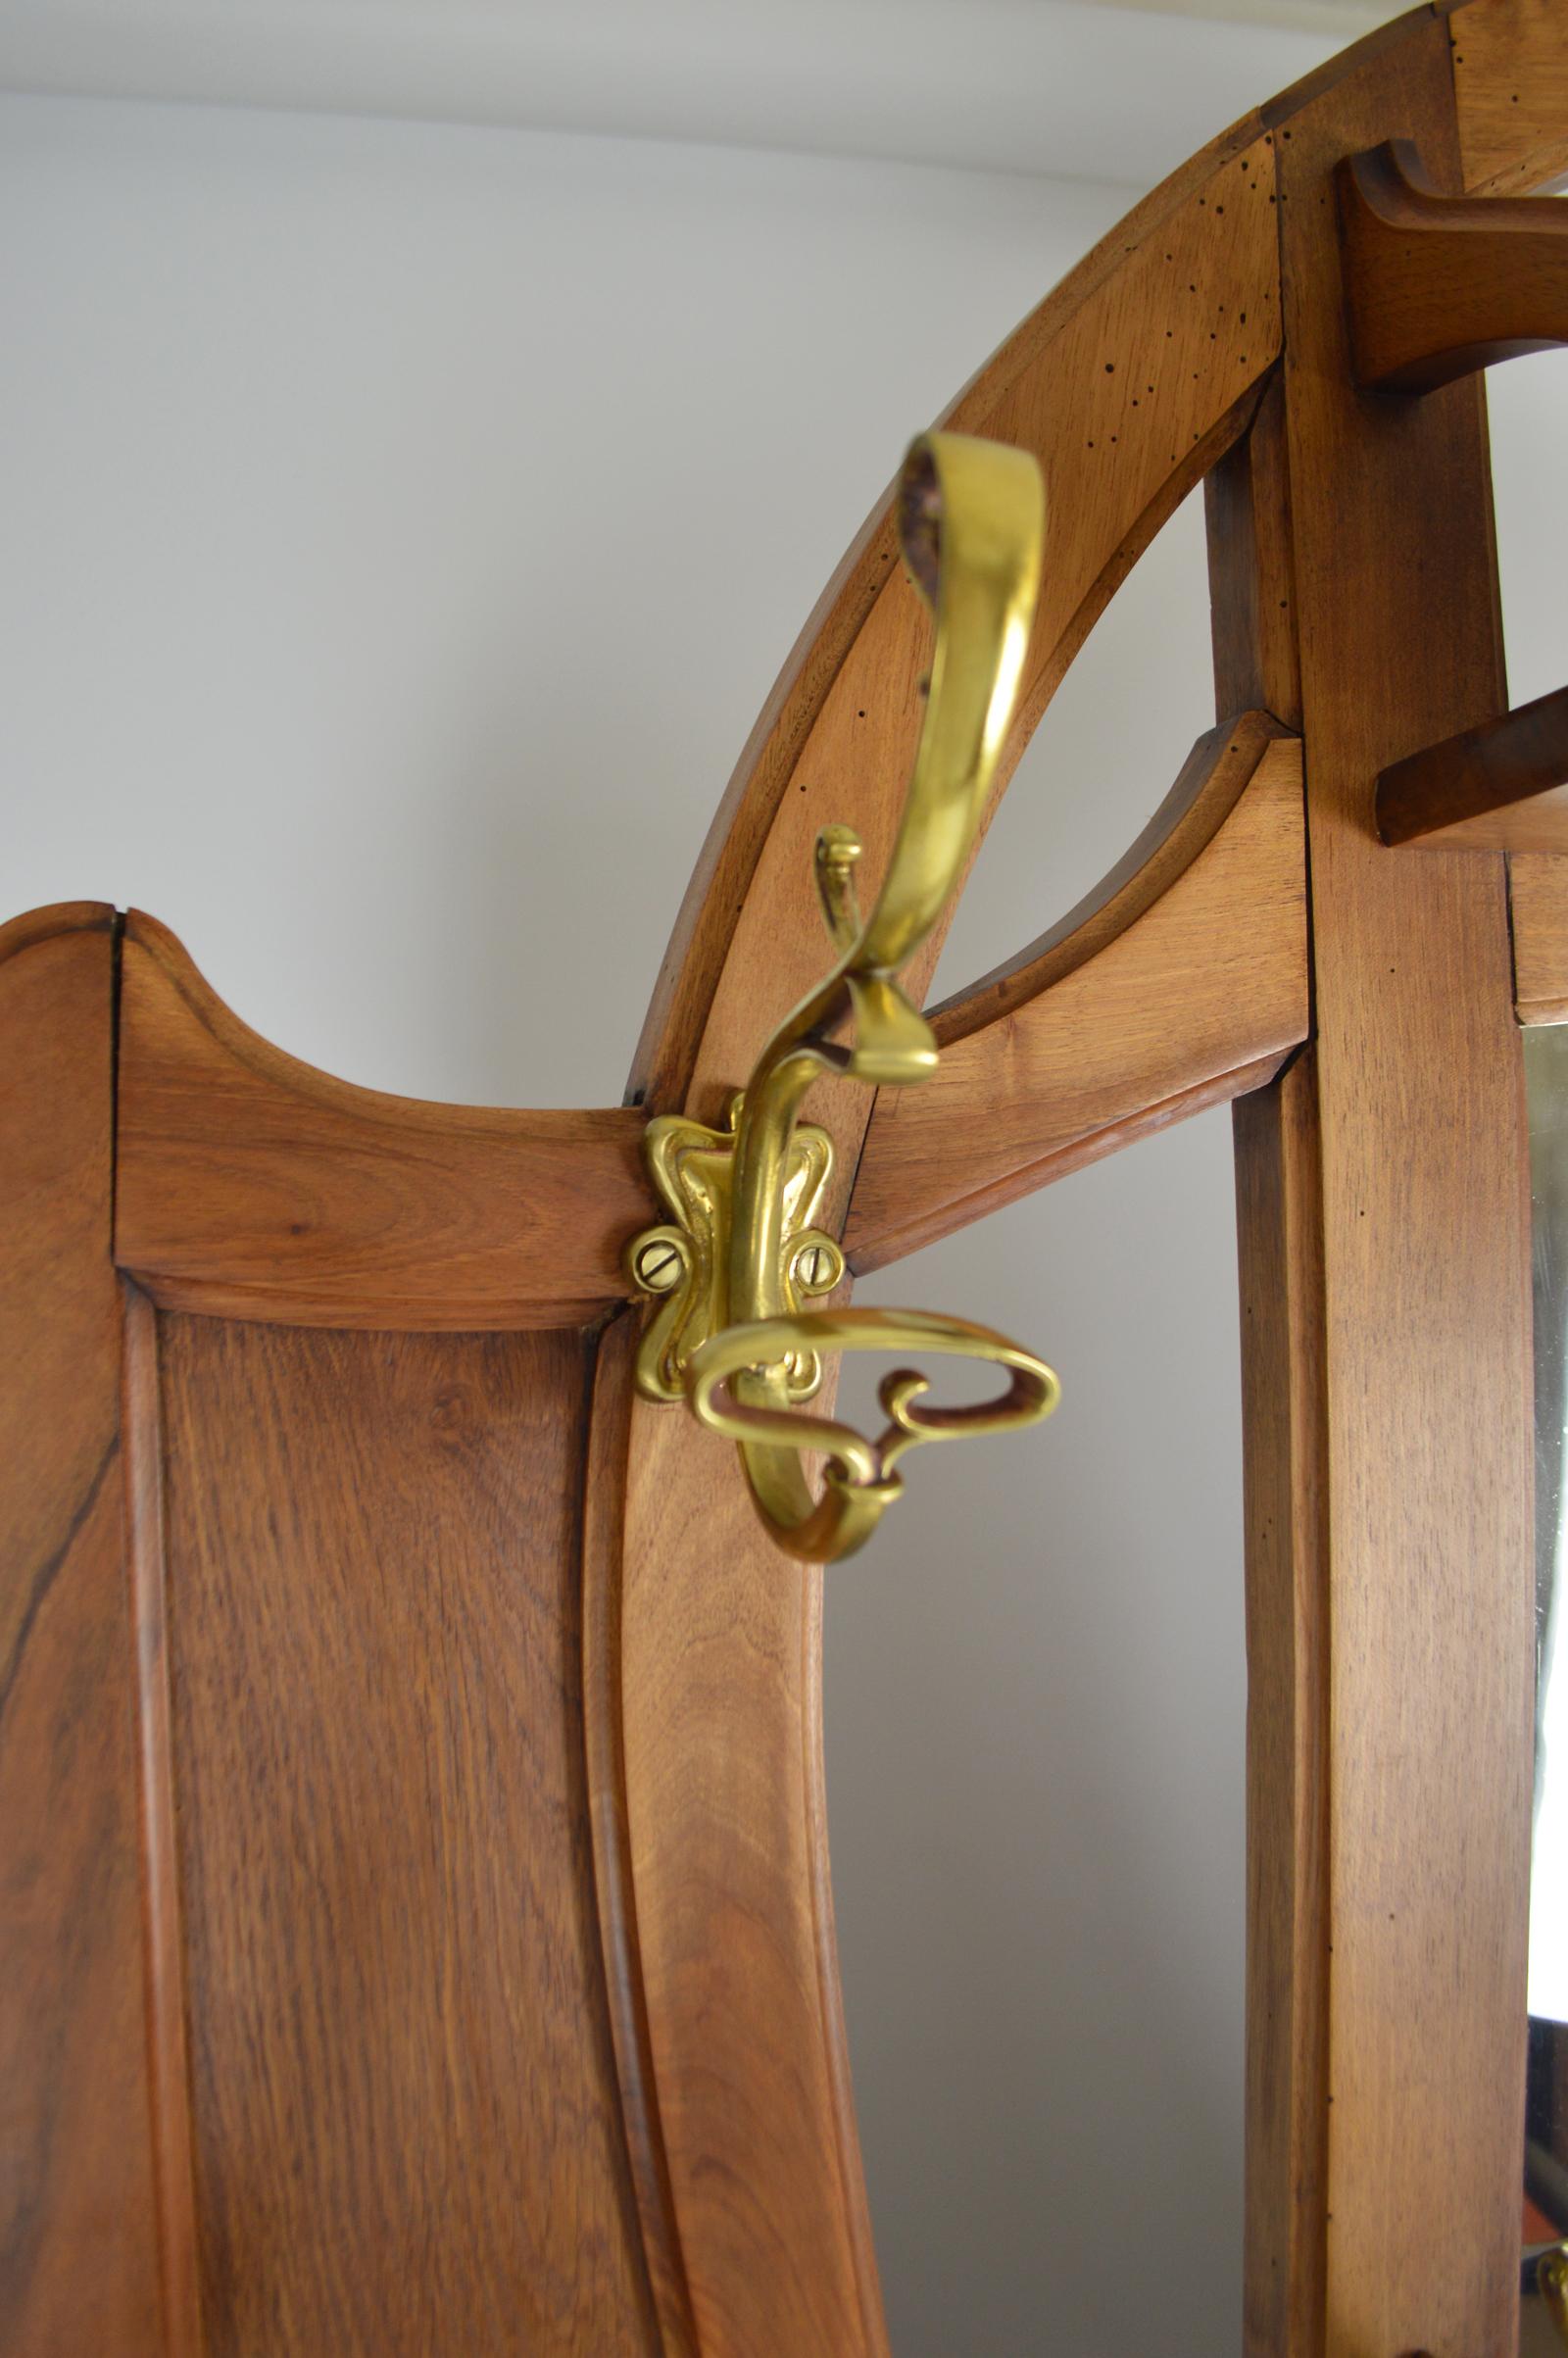 Early 20th Century Art Nouveau Hall Stand or Coat Rack in the Style of Serrurier-Bovy, circa 1900 For Sale